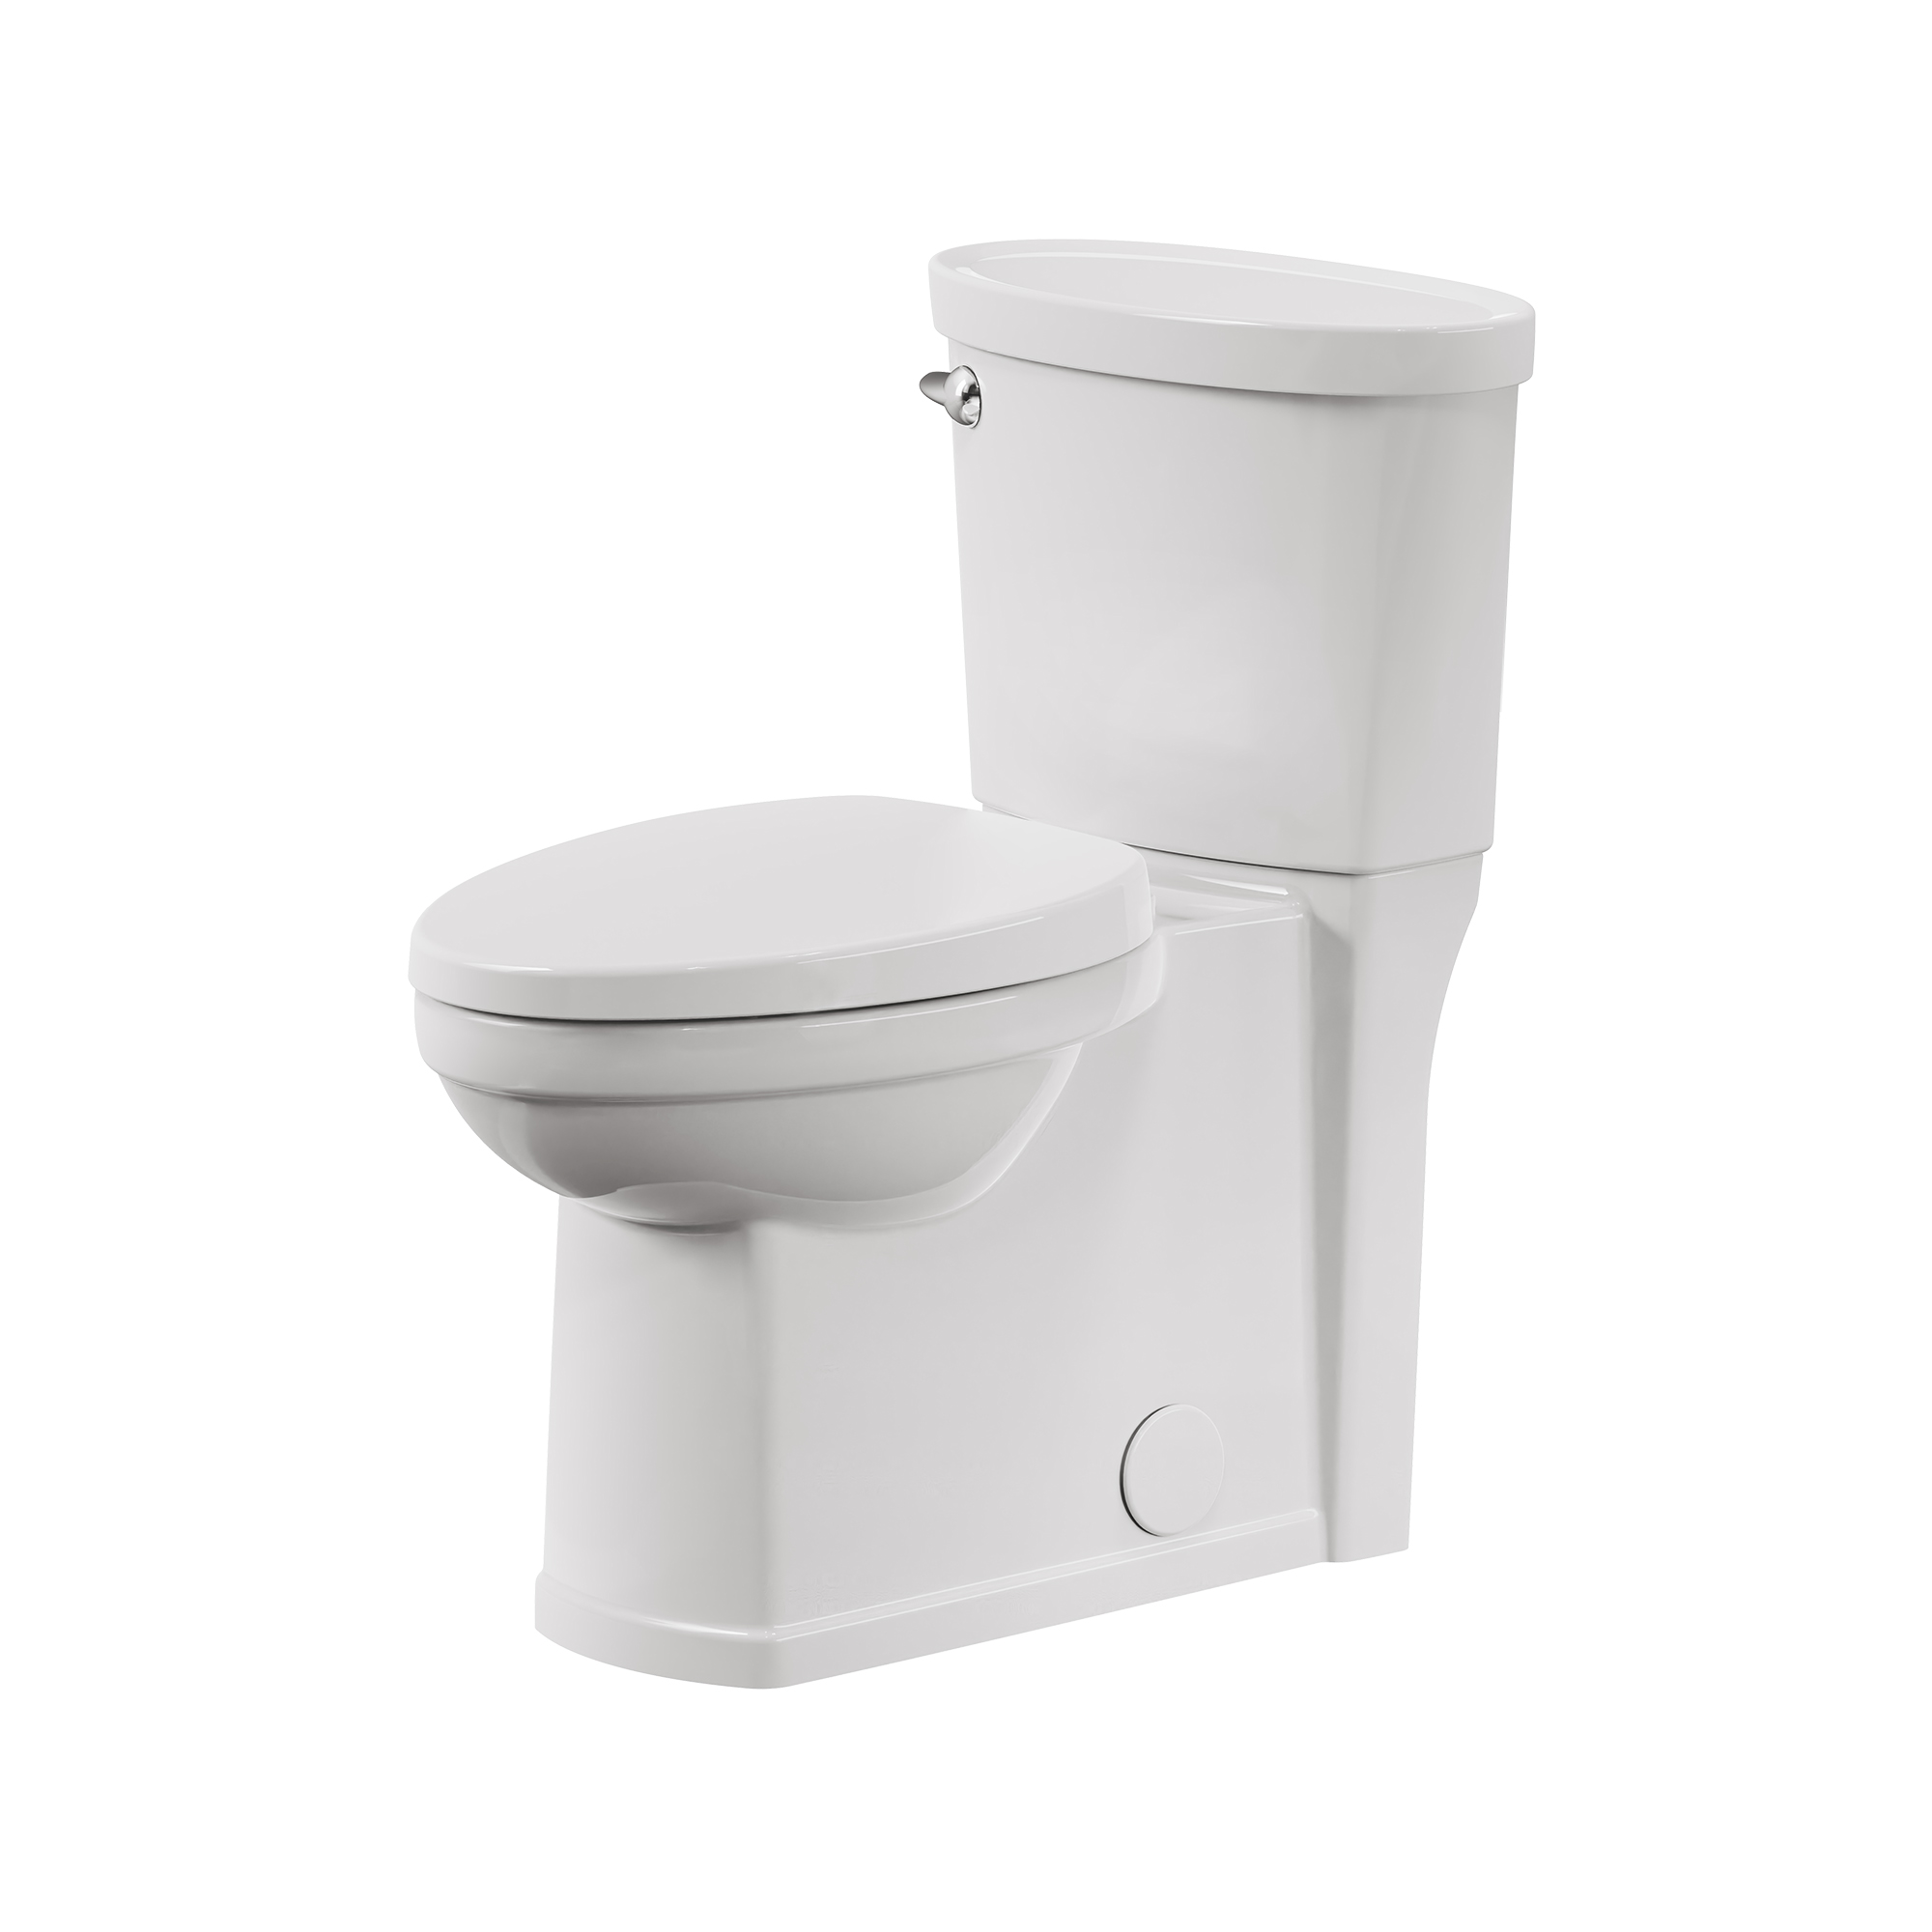 Décor Two-Piece 1.28 gpf/4.8 Lpf Chair Height Elongated Complete Toilet With Seat